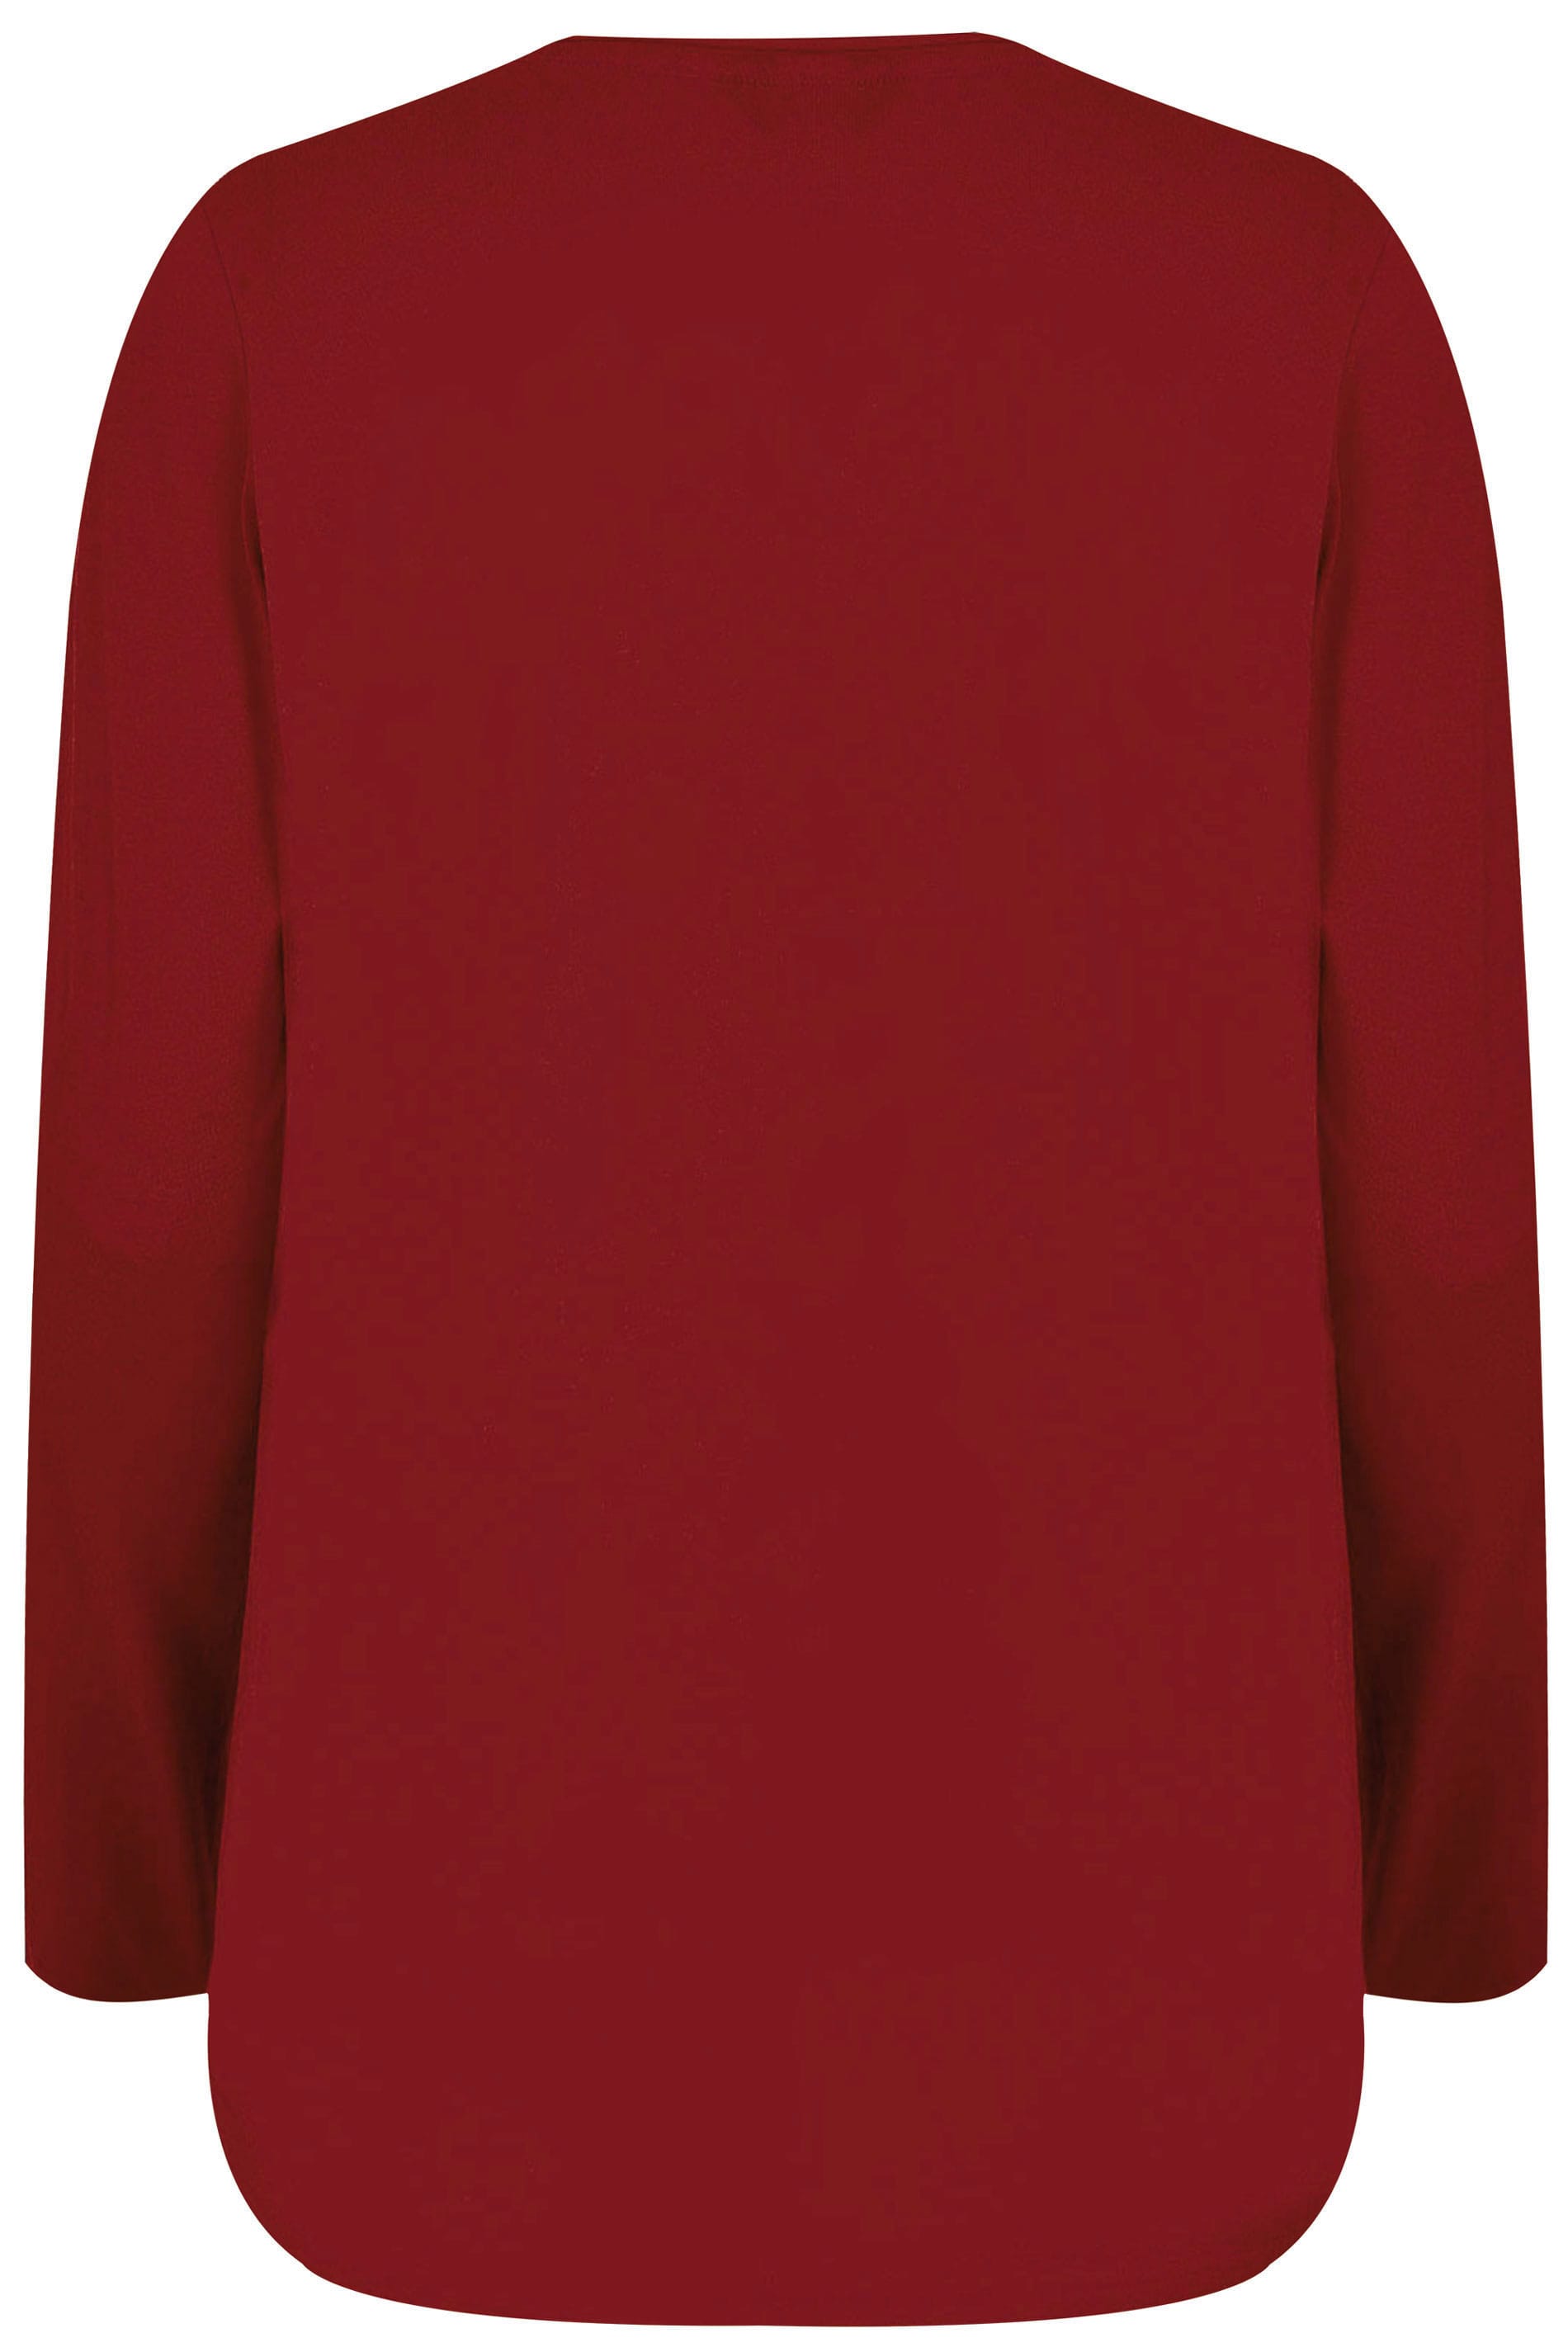 Dark Red Long Sleeved V-Neck Jersey Top, plus size 18 to 36 | Yours ...